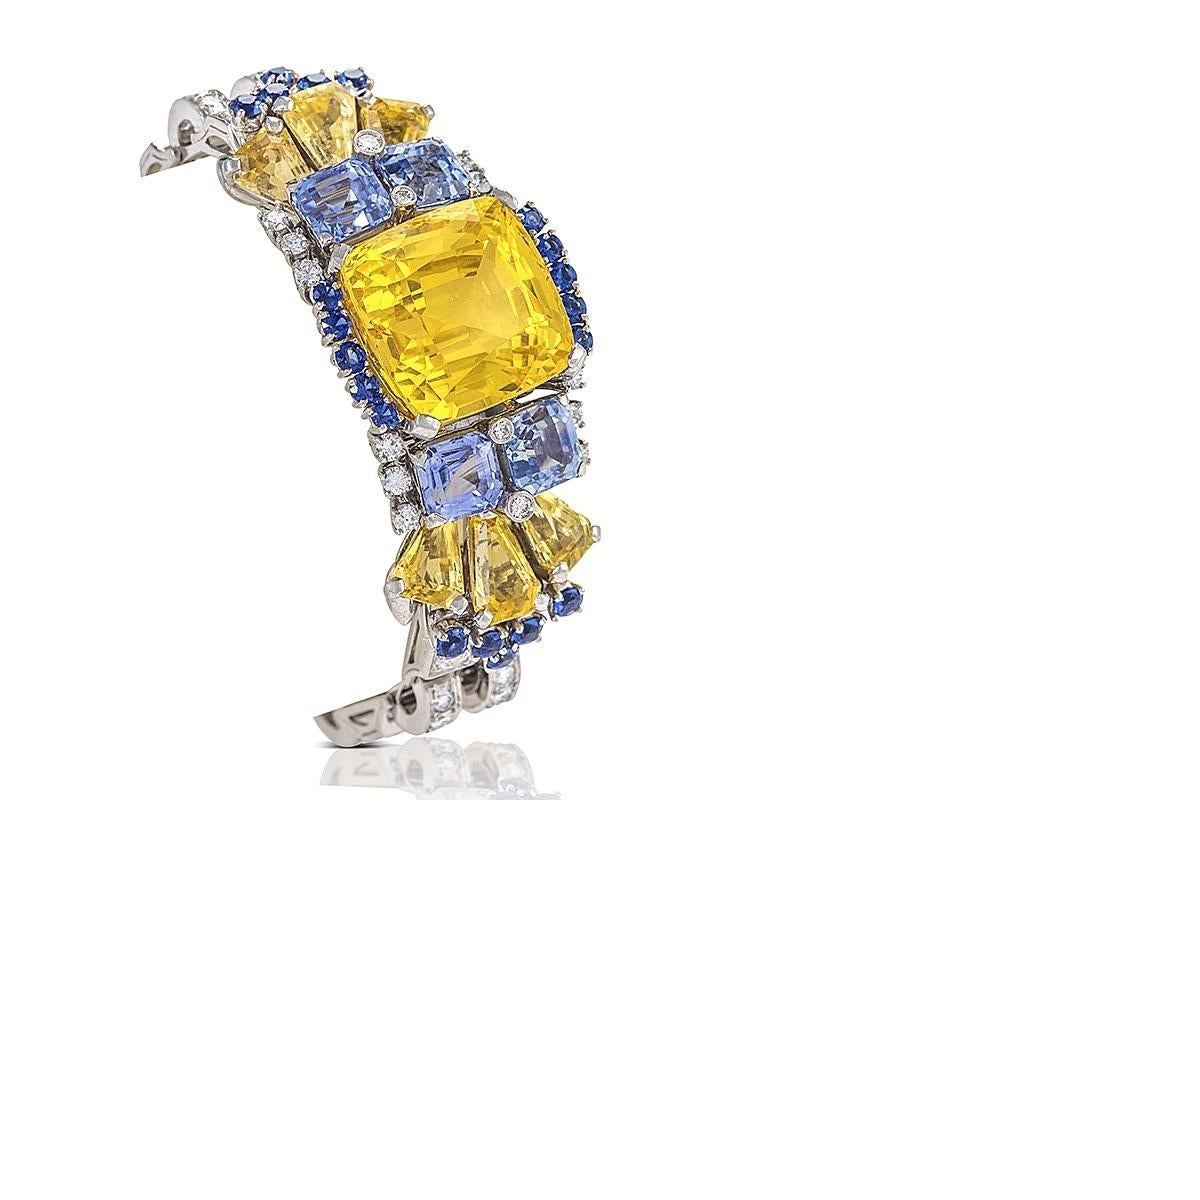 An American Mid-20th Century platinum bracelet with diamonds, yellow, light blue and, blue sapphires by Oscar Heyman. The bracelet has a square cushion yellow sapphire that weighs 41.47 carats, 4 Asscher-cut light blue sapphires with an approximate